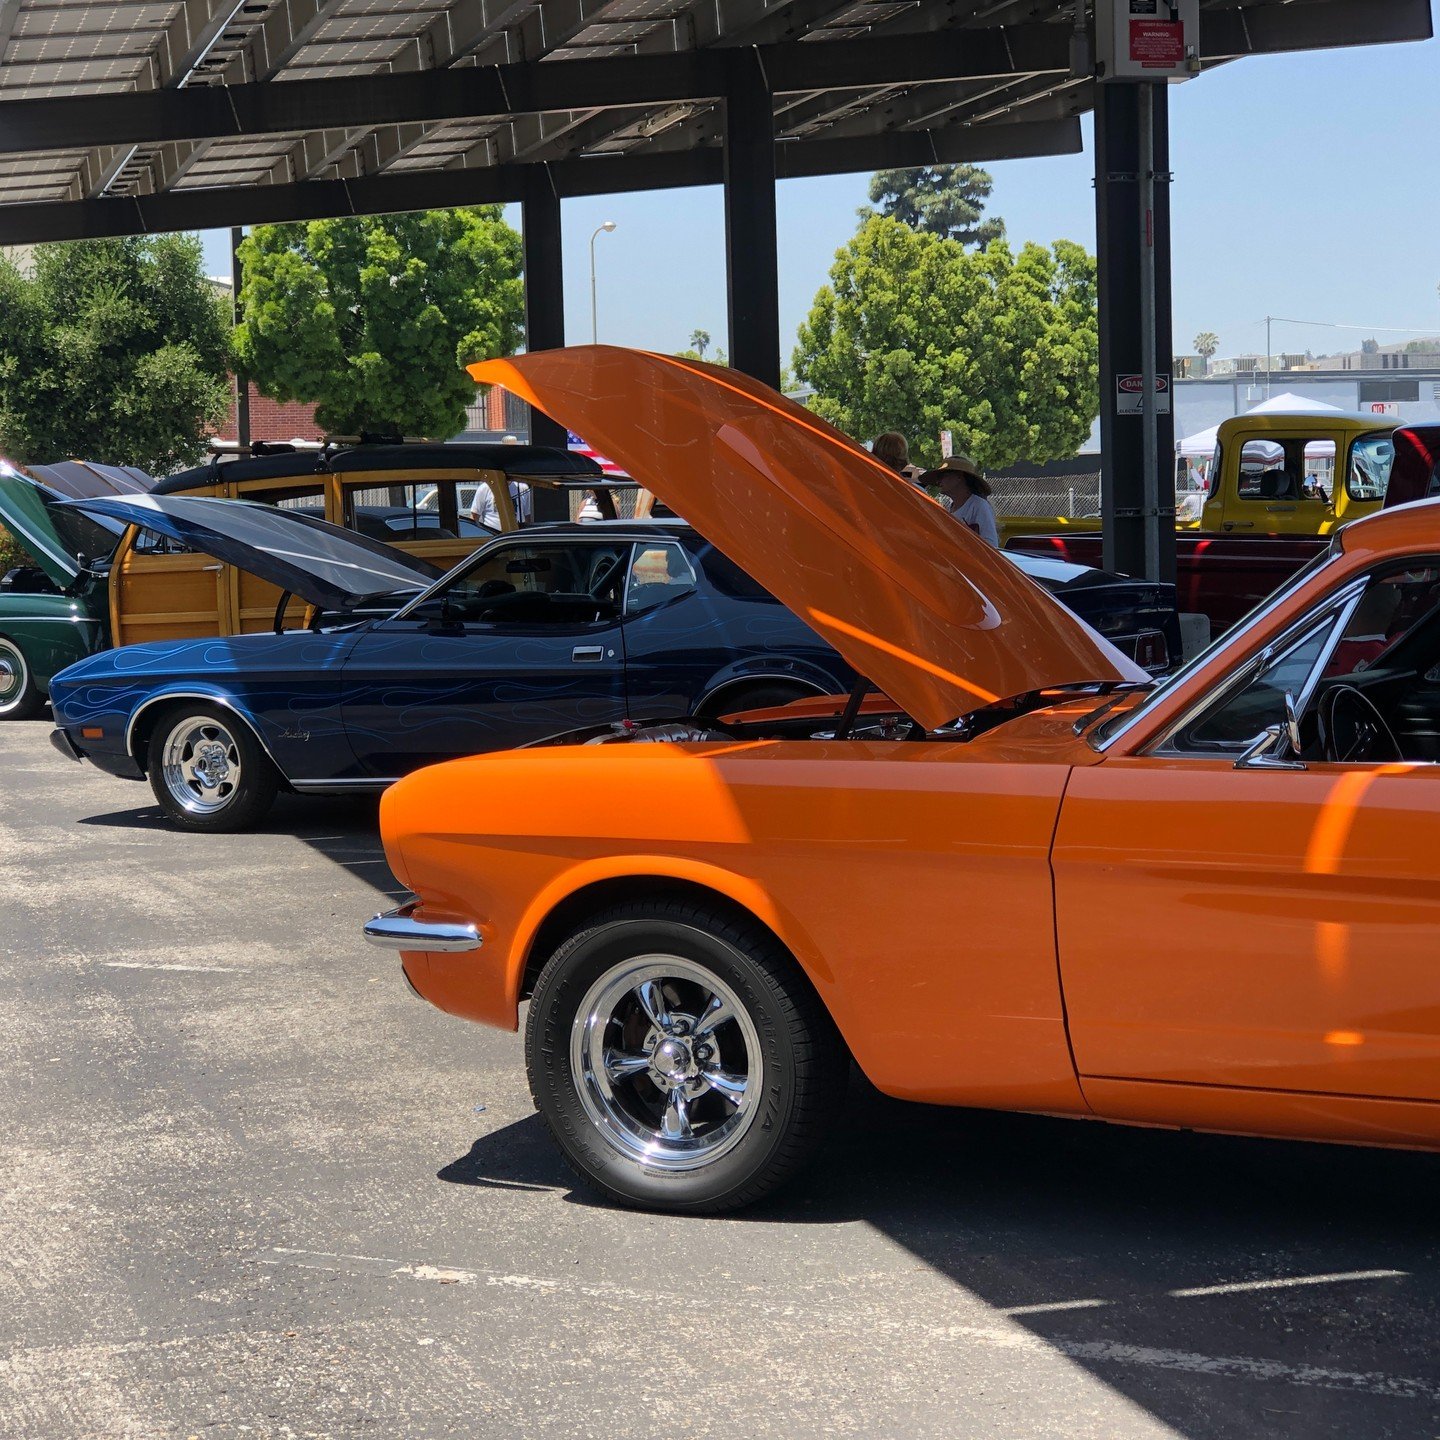 Gettin' ready to roll out on Saturday. 

Final hours to register online for the car show at rhsroute66cc.com

#wildbillsriversidenationals #riversidecarshows